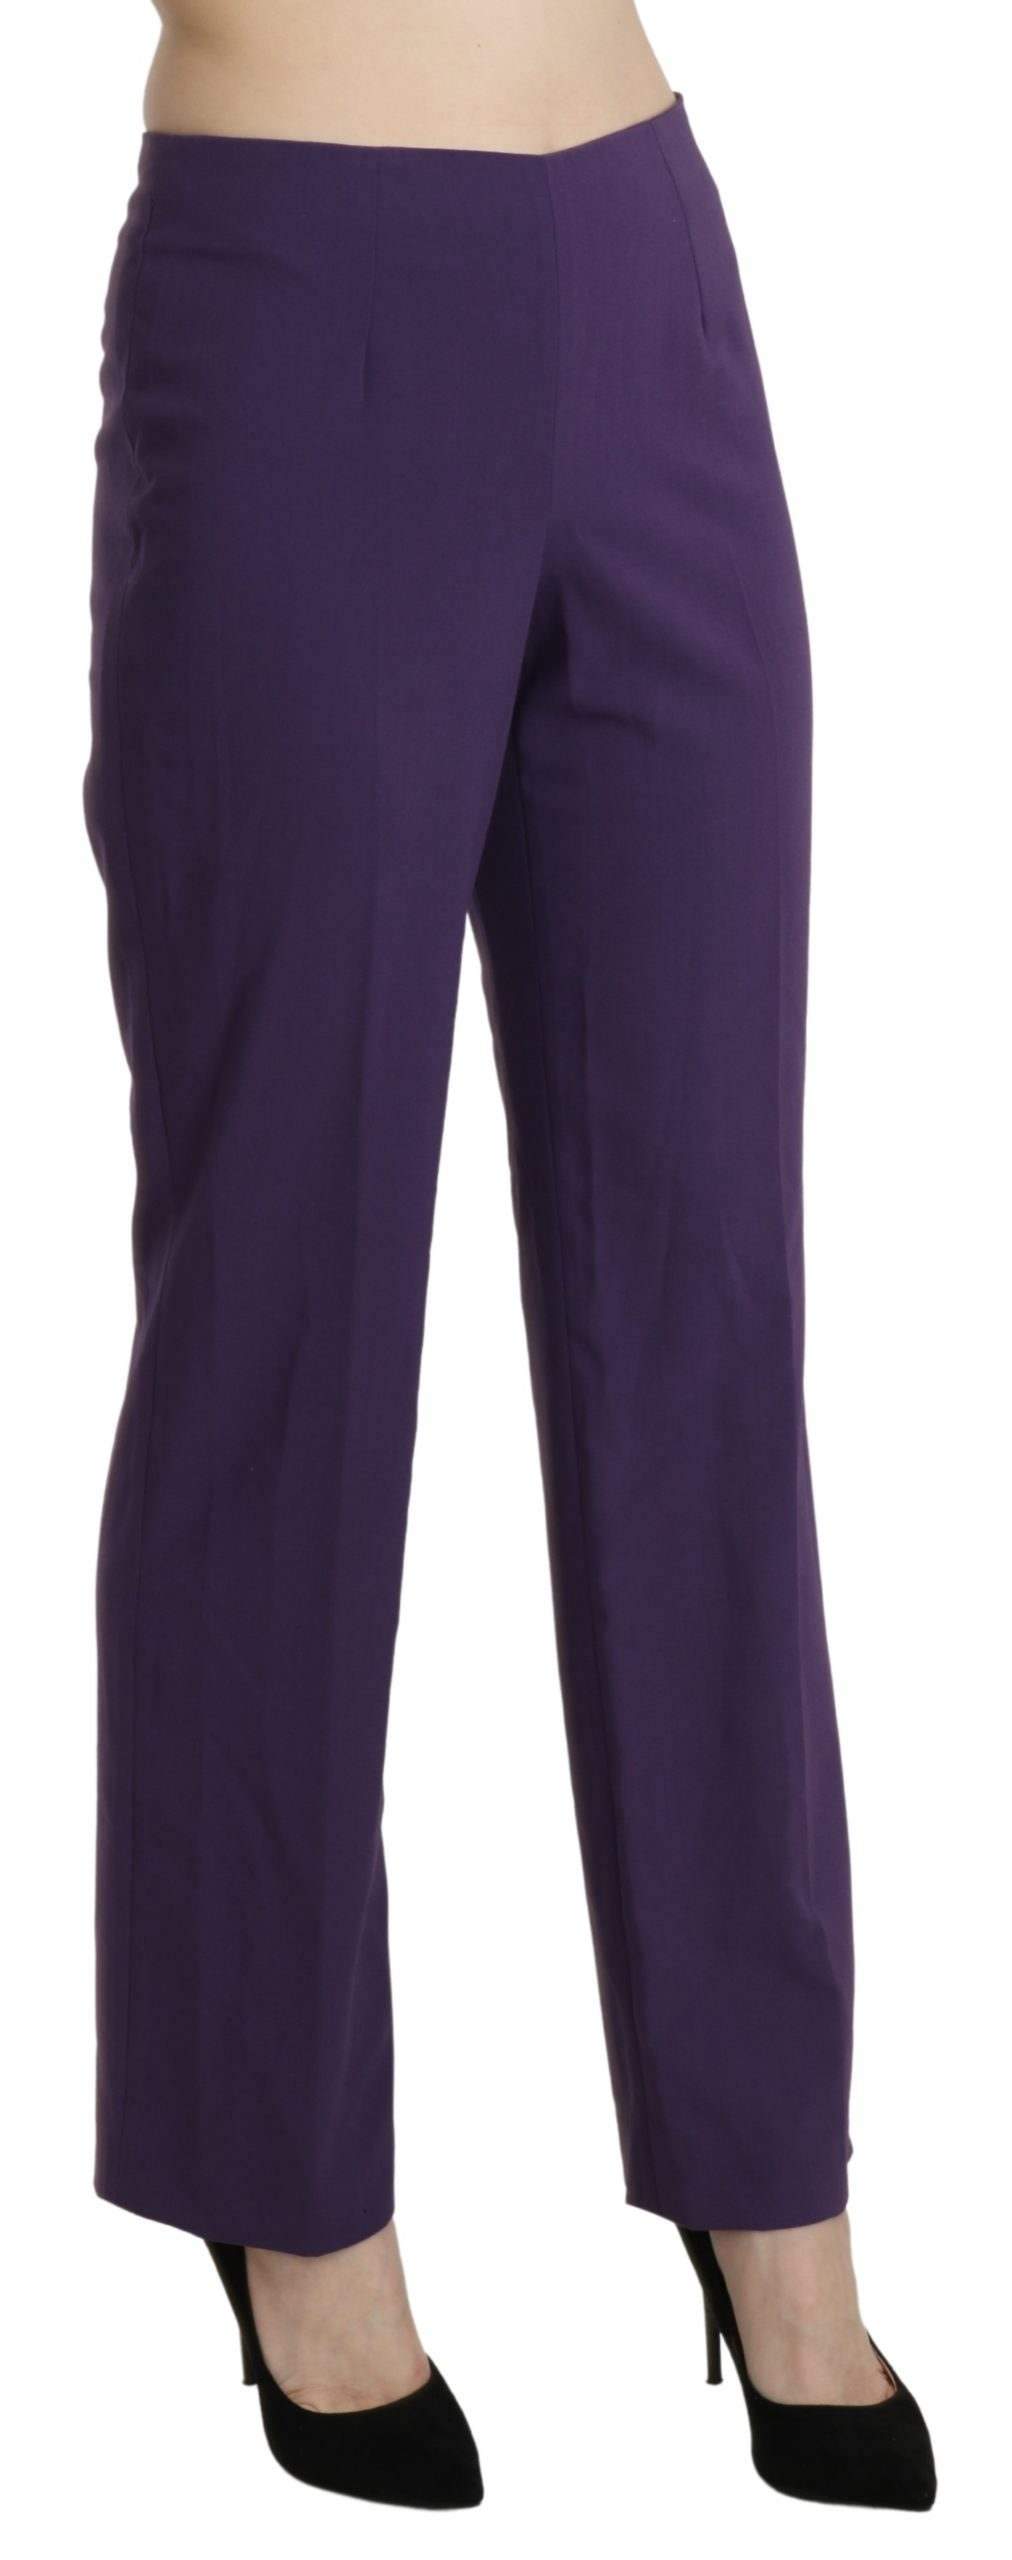 BENCIVENGA Purple High Waist Straight Dress Trouser Pants #women, BENCIVENGA, feed-agegroup-adult, feed-color-violet, feed-gender-female, feed-size-IT42|M, Gender_Women, IT42|M, Jeans & Pants - Women - Clothing, Violet, Women - New Arrivals at SEYMAYKA